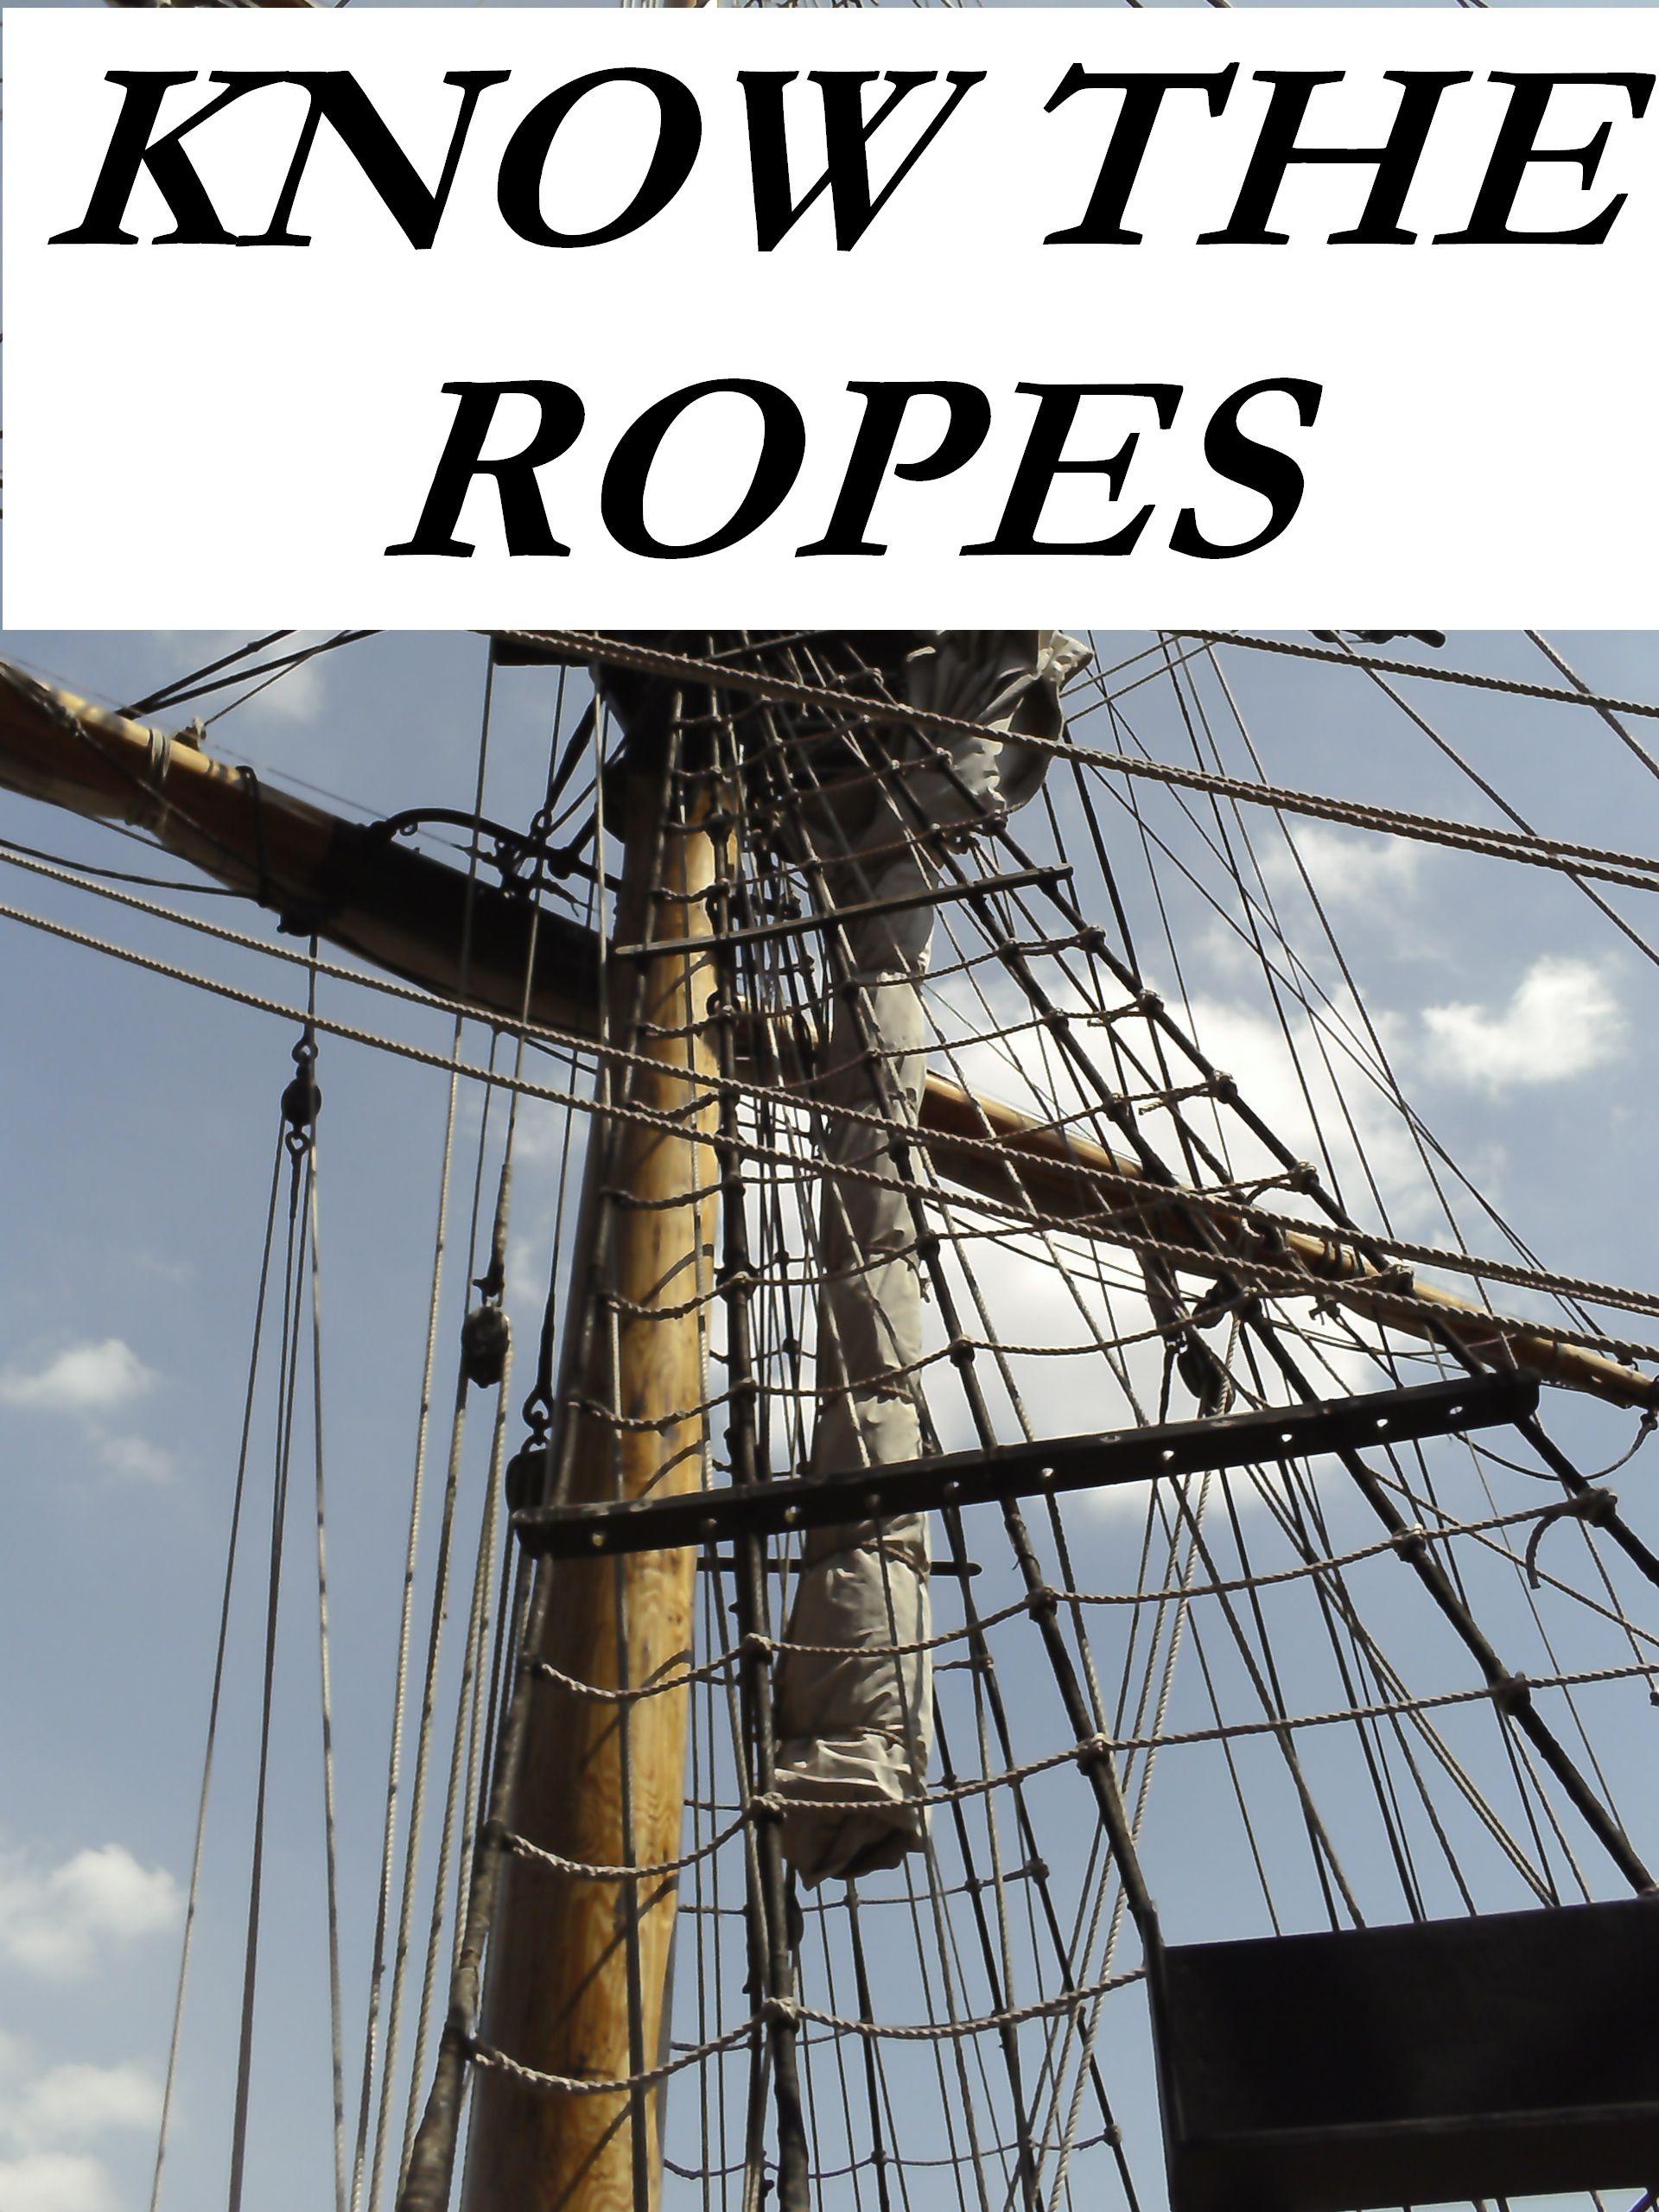 On the ropes meaning